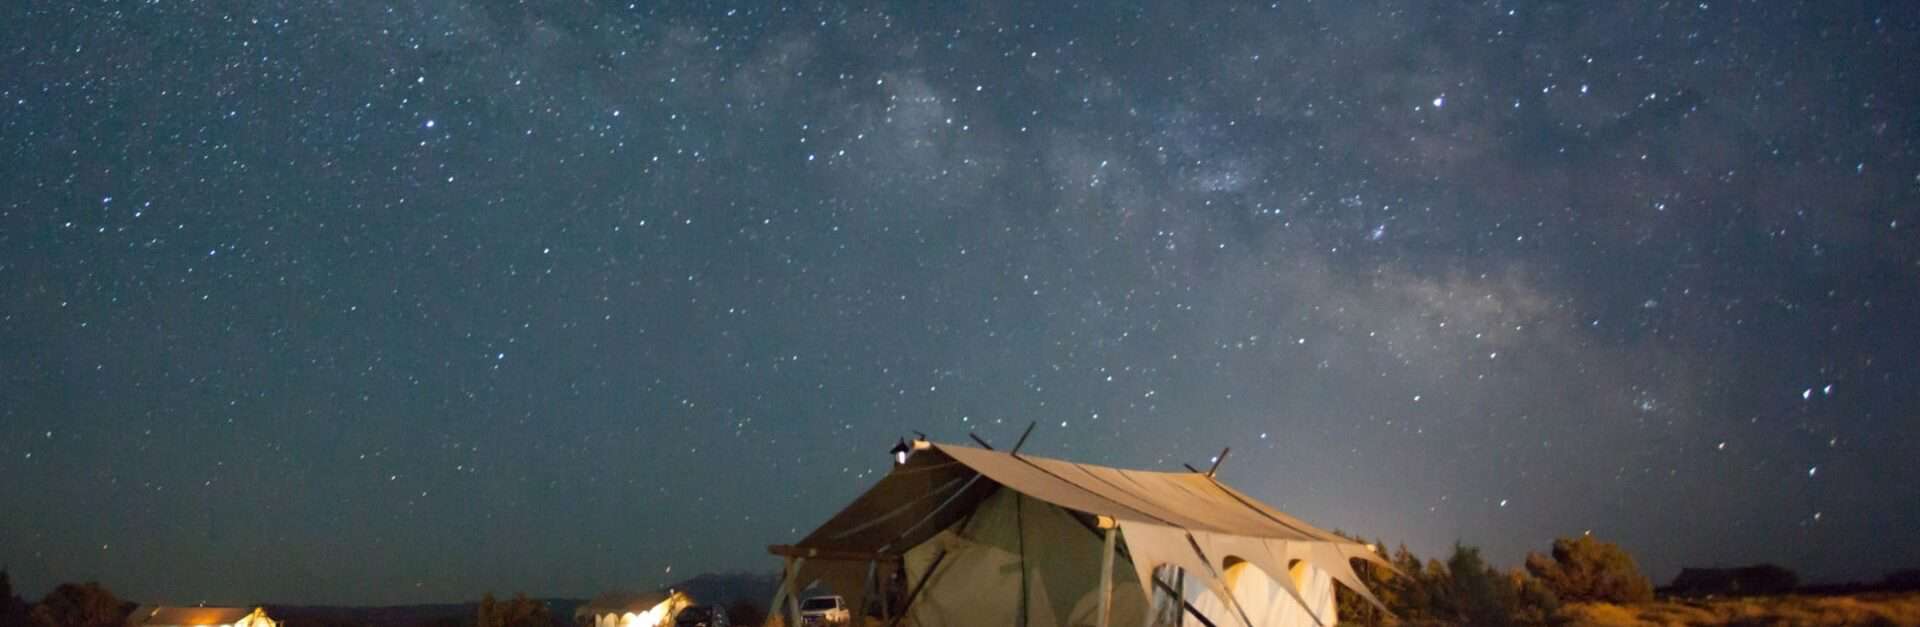 Wall tent set up in scrub land under a starry sky at night.